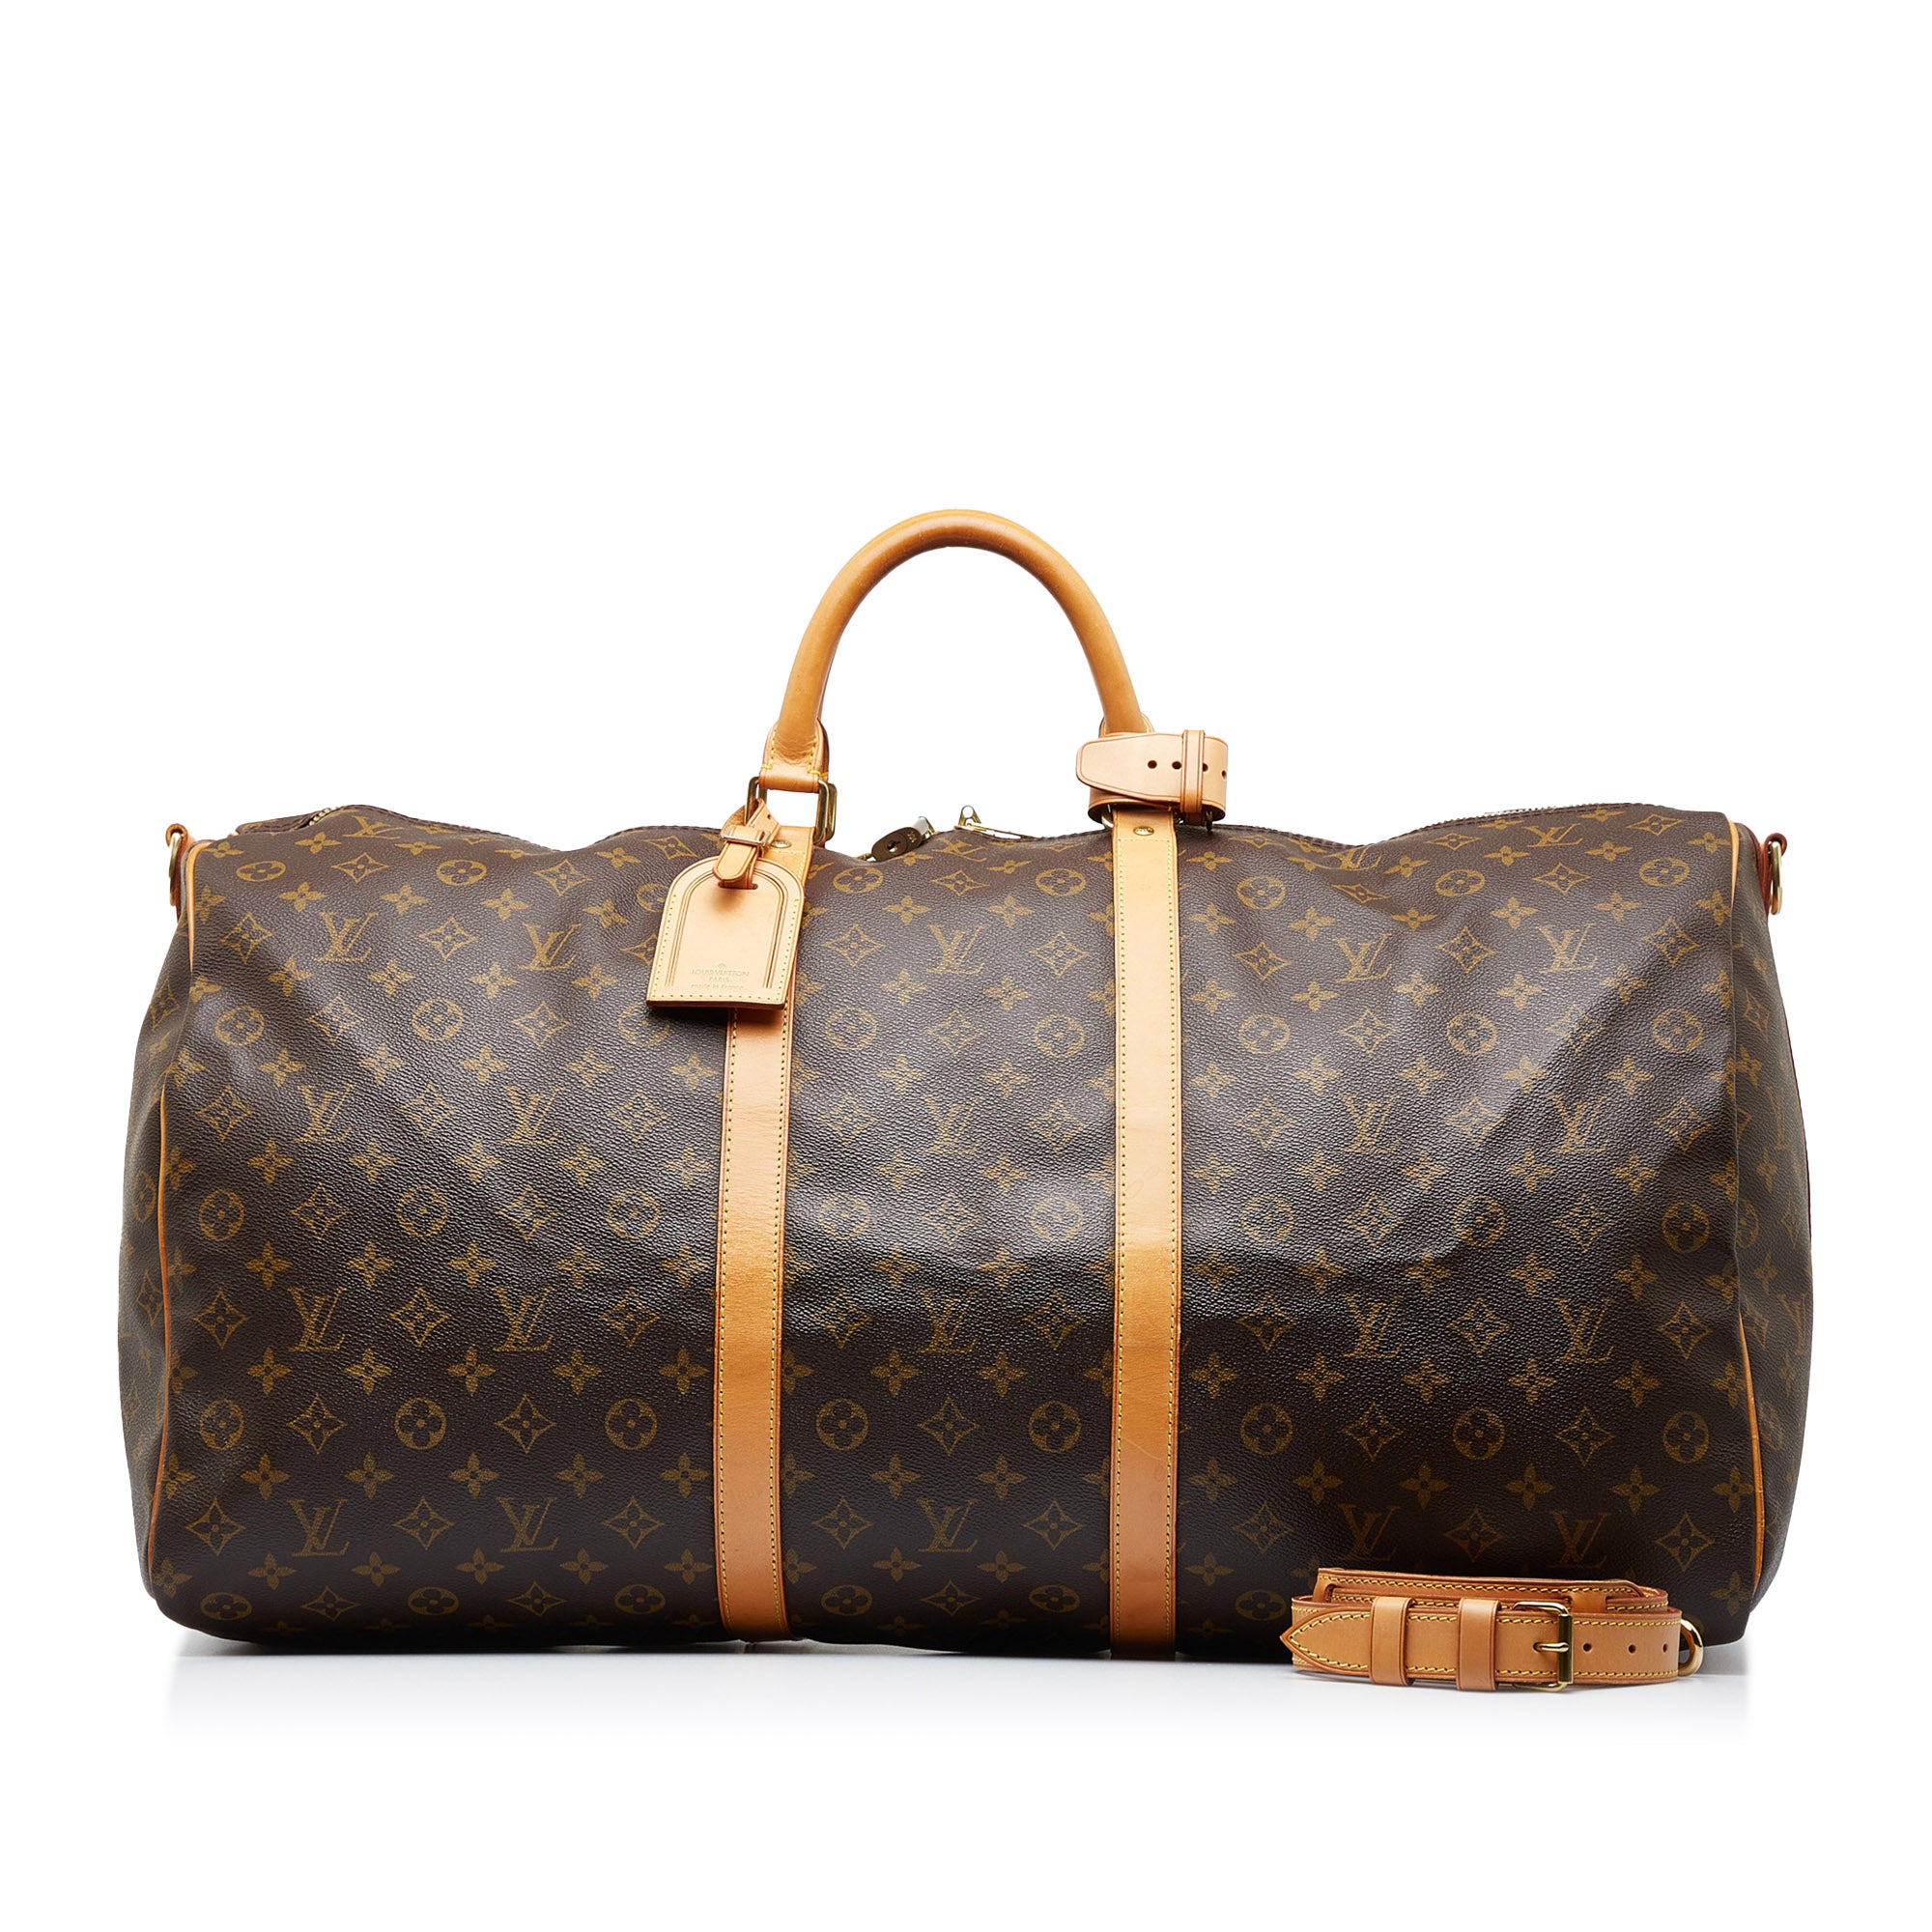 LOUIS VUITTON KEEPALL BANDOULIERE 50!Fiery Red Taiga Leather! SOLD OUT!